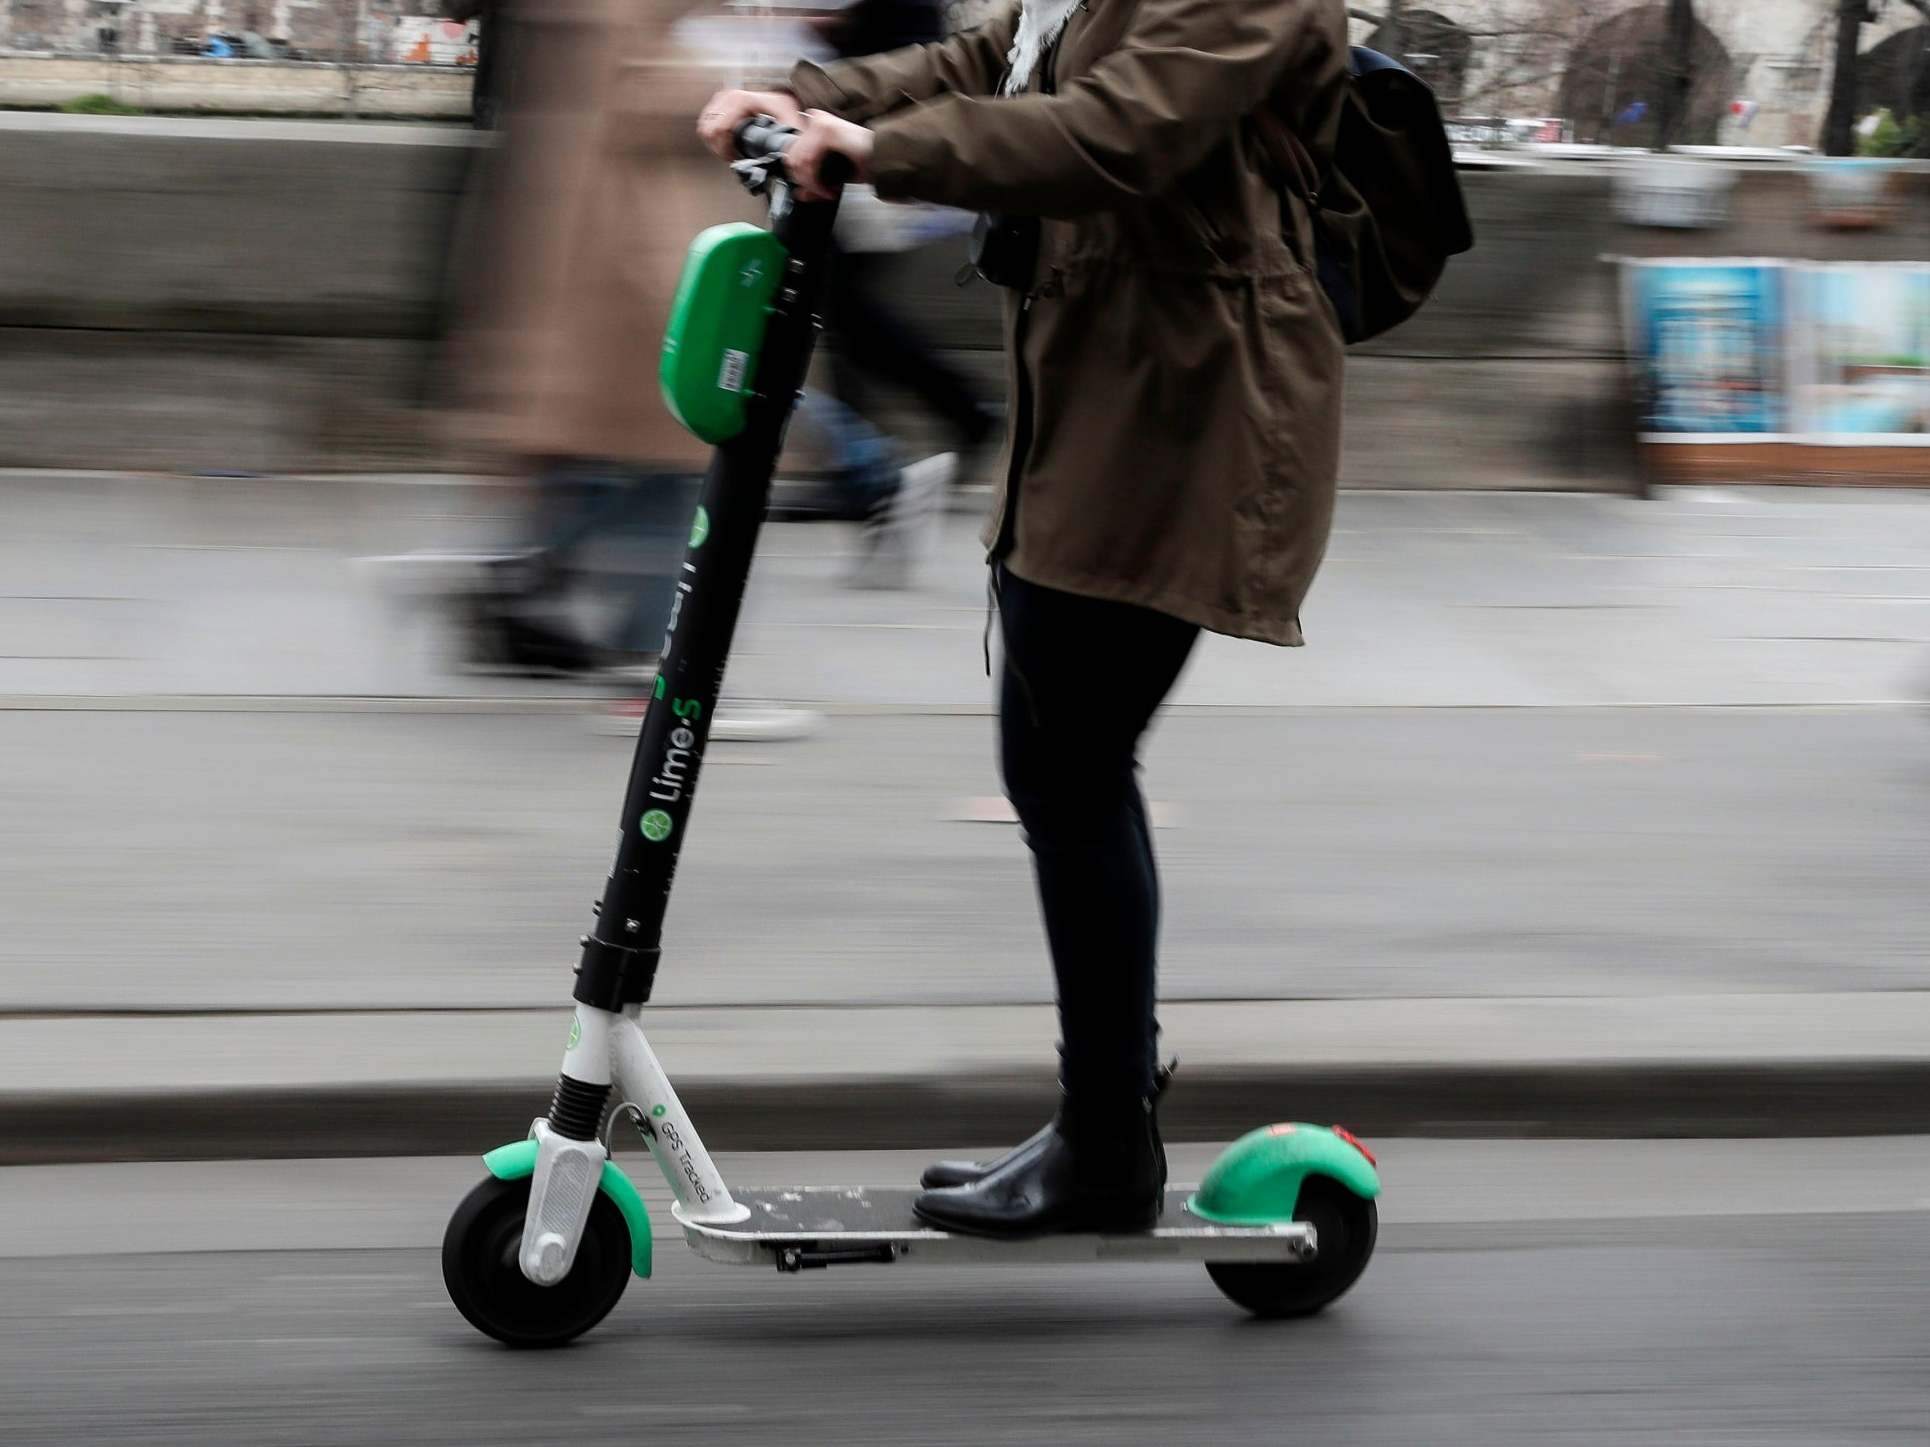 Electric scooters have become popular all over the world, here seen in Paris